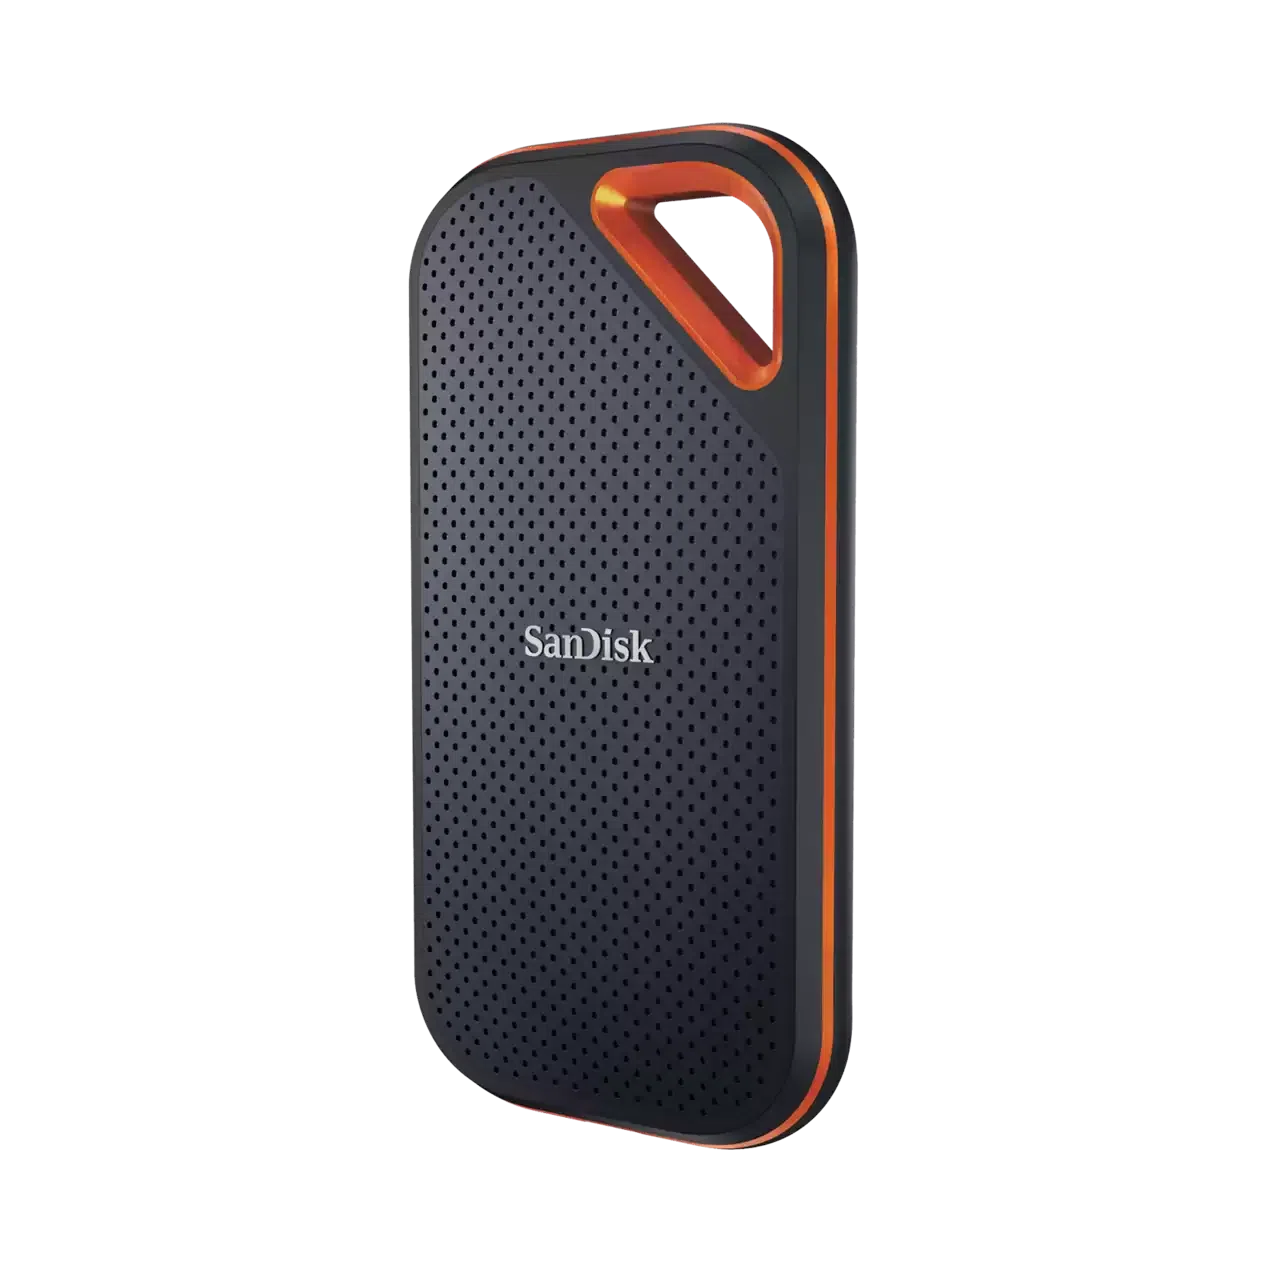 4TB SanDisk Extreme PRO Portable SSD - Up to 2000MB/s - USB-C, USB 3.2 - Star Light Kuwait